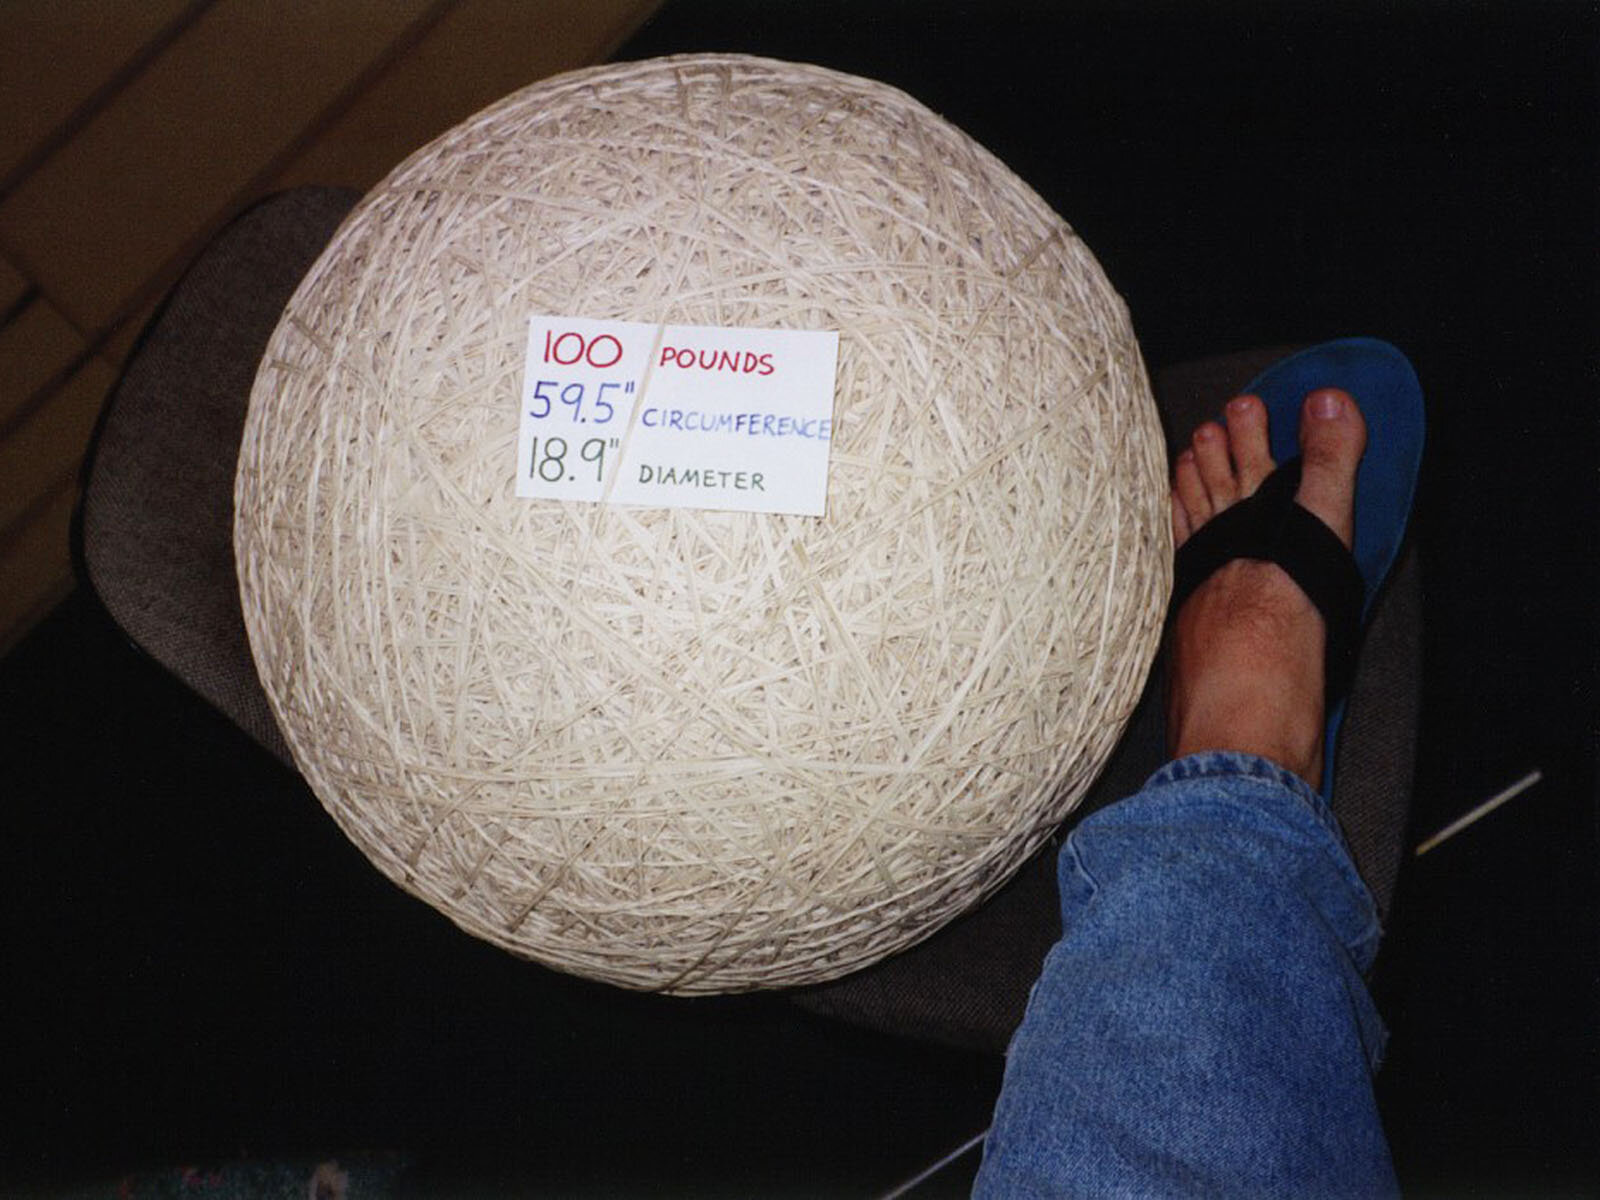 Put Your Name Or Image On A Huge 100 Lb Rubber Band Ball